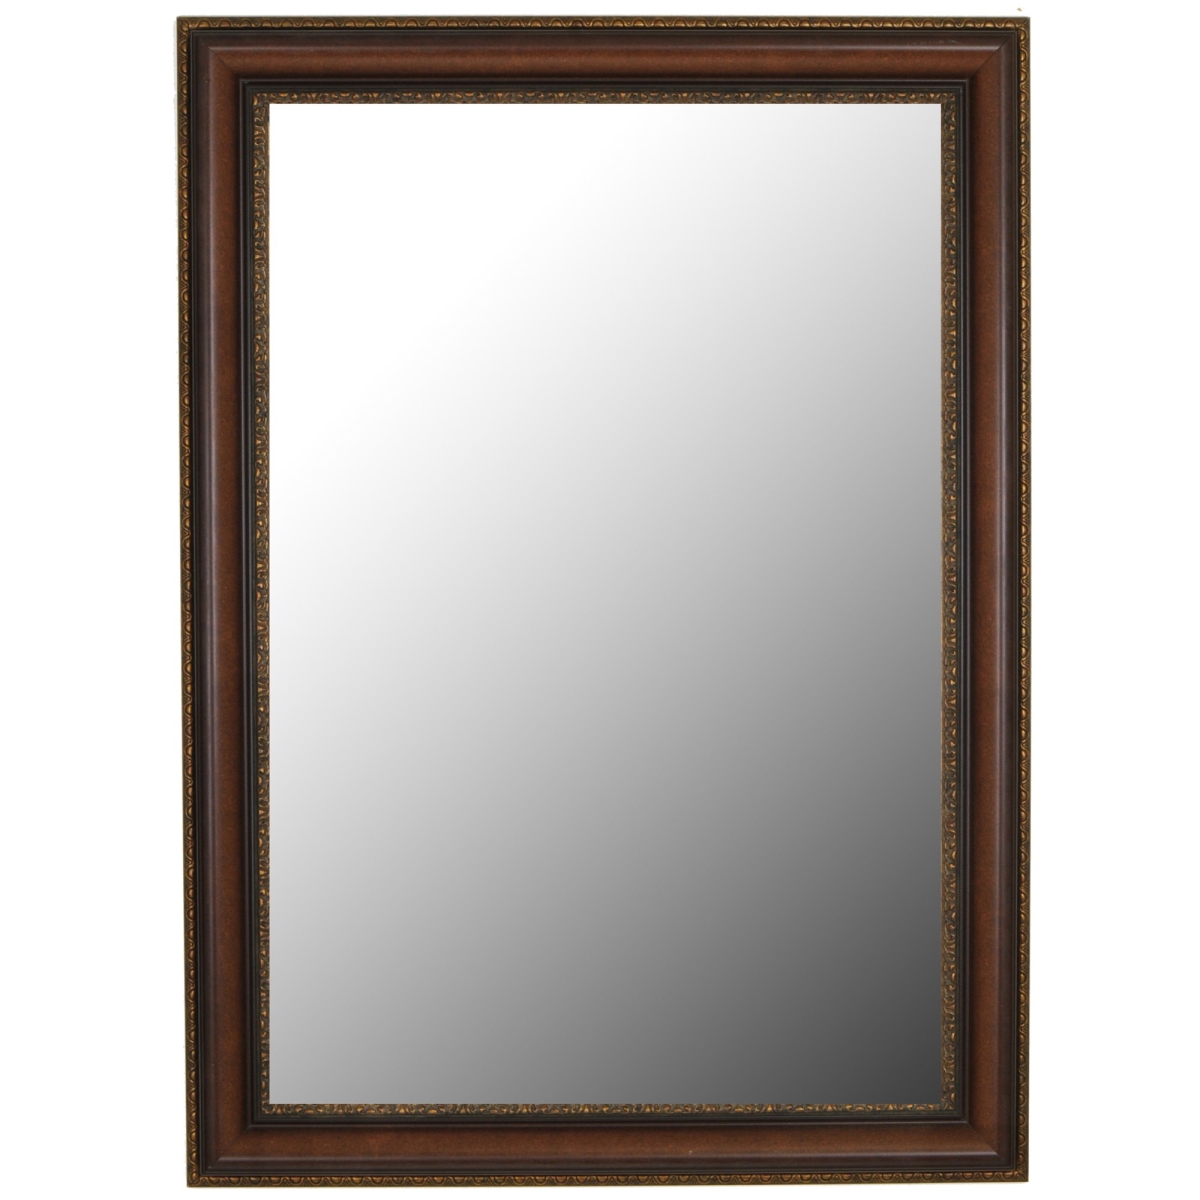 Hitchcock Butterfield 810508 Brown Janette Wall Mirror - 29.5 X 65.5 In.